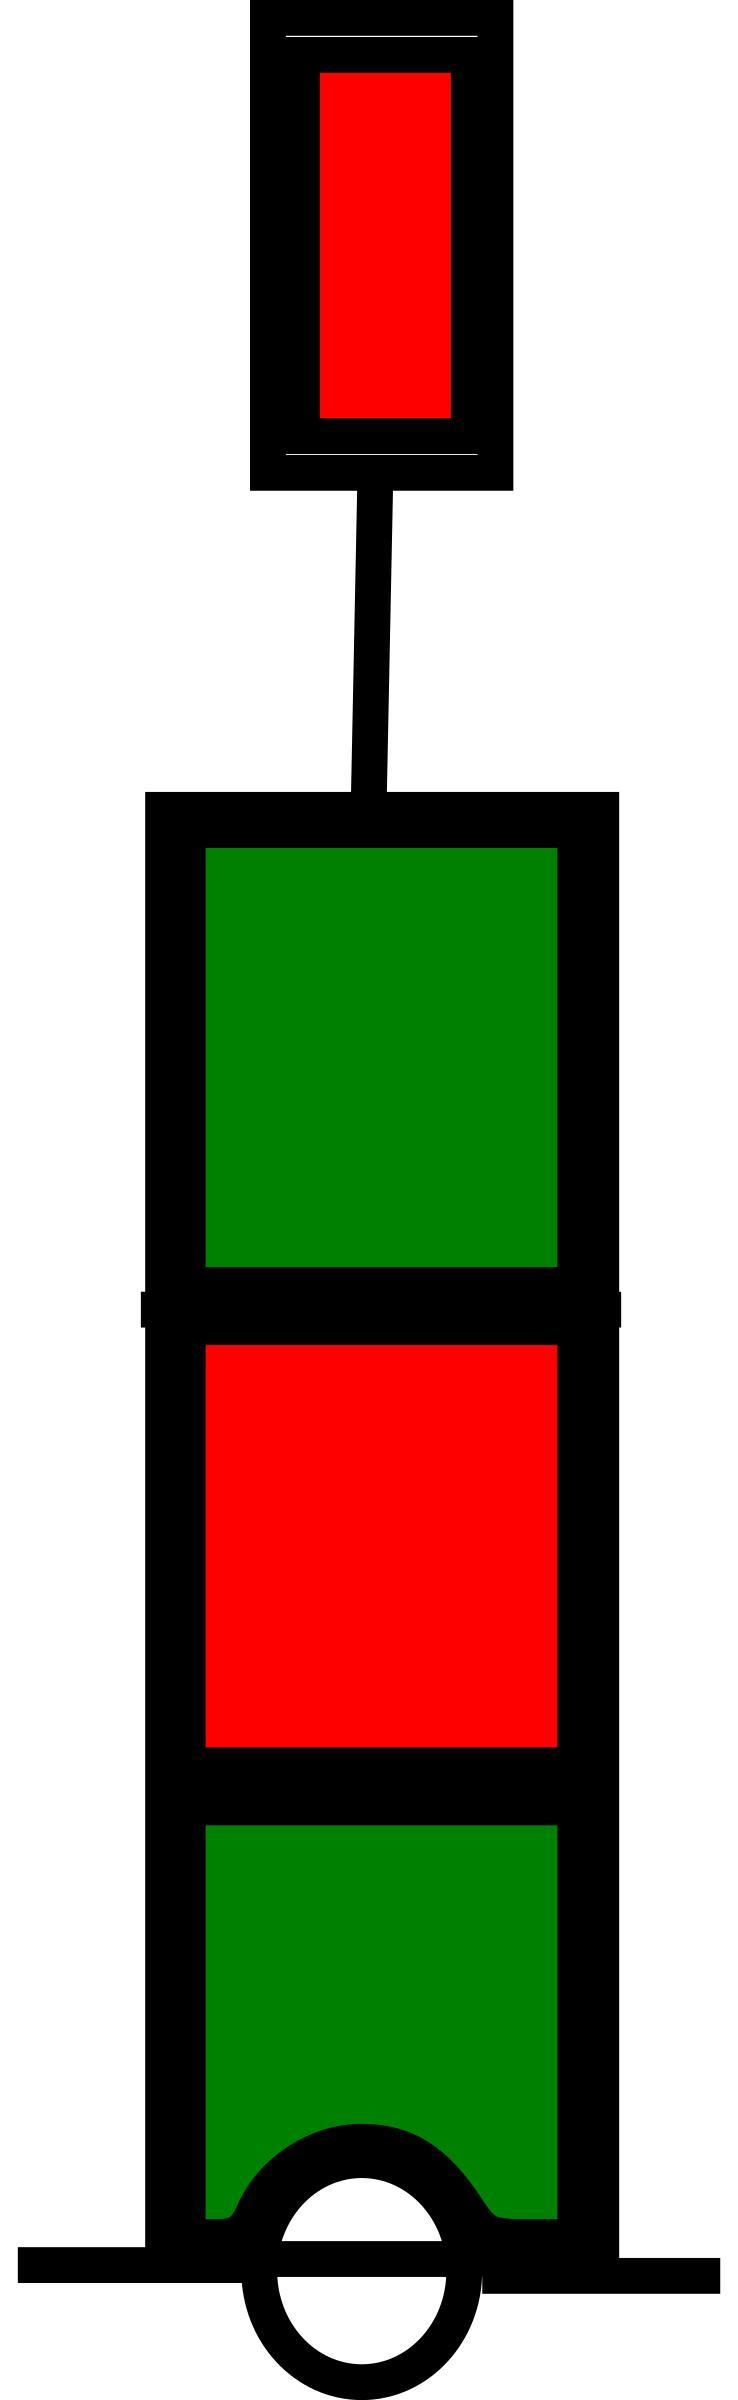 beacon green red green png transparent